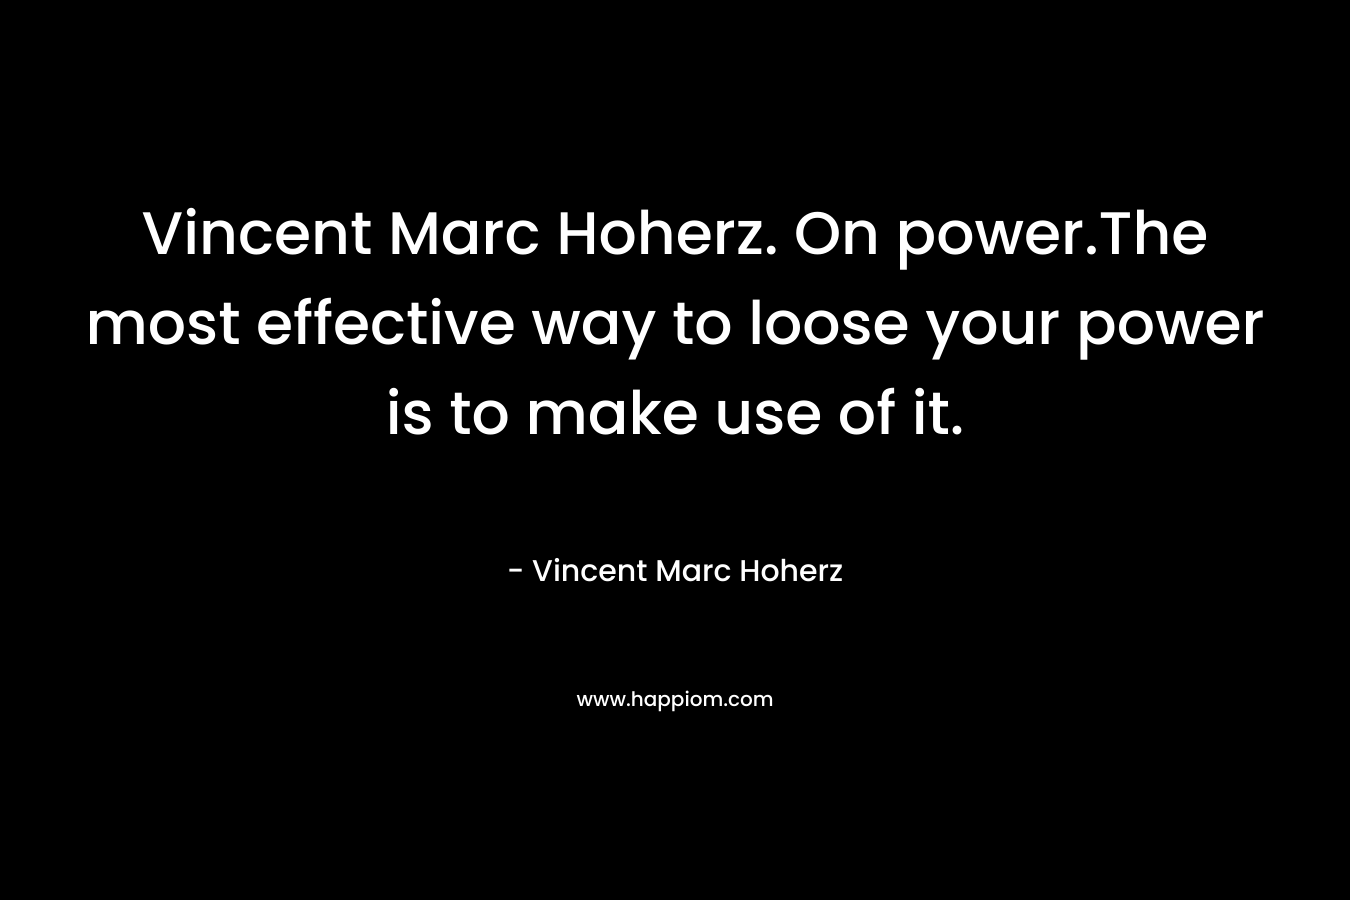 Vincent Marc Hoherz. On power.The most effective way to loose your power is to make use of it. – Vincent Marc Hoherz